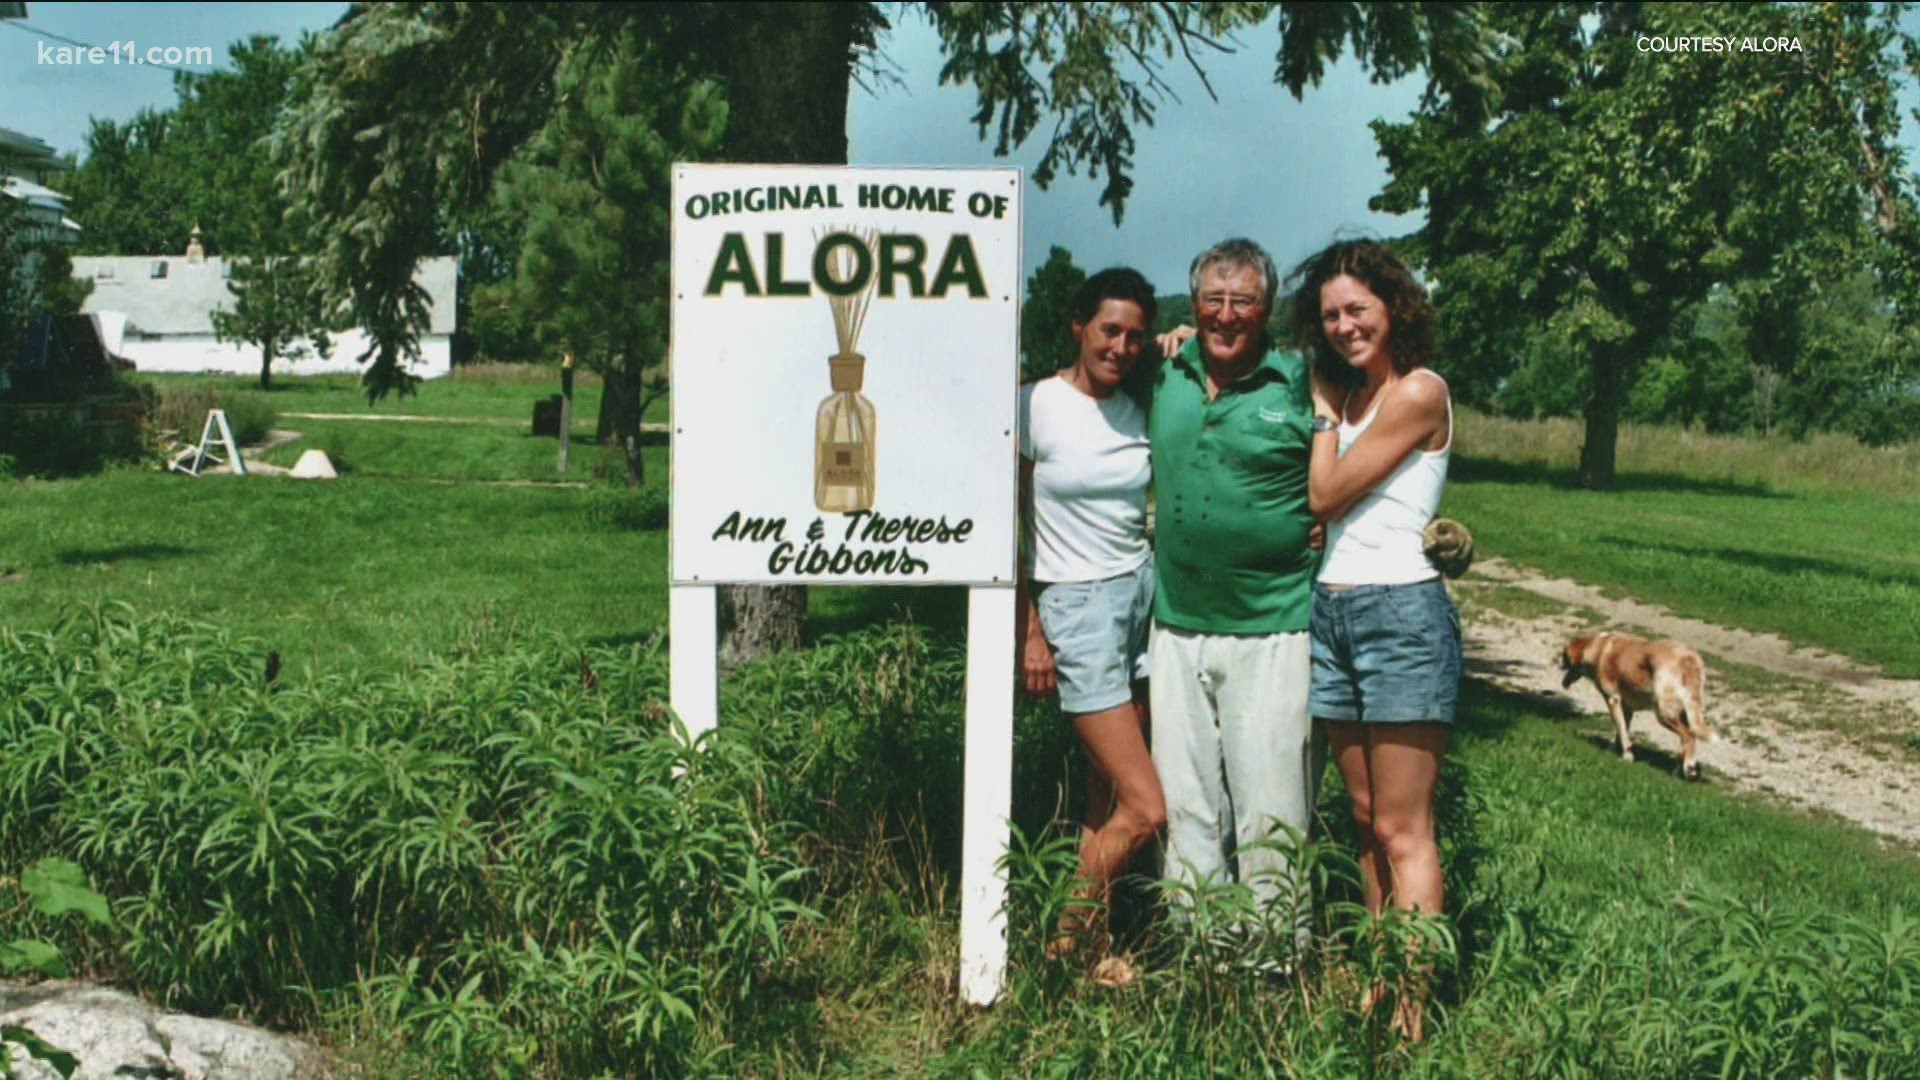 KARE 11 spoke to the founders of Alora Ambience about the trip that led to a new business.